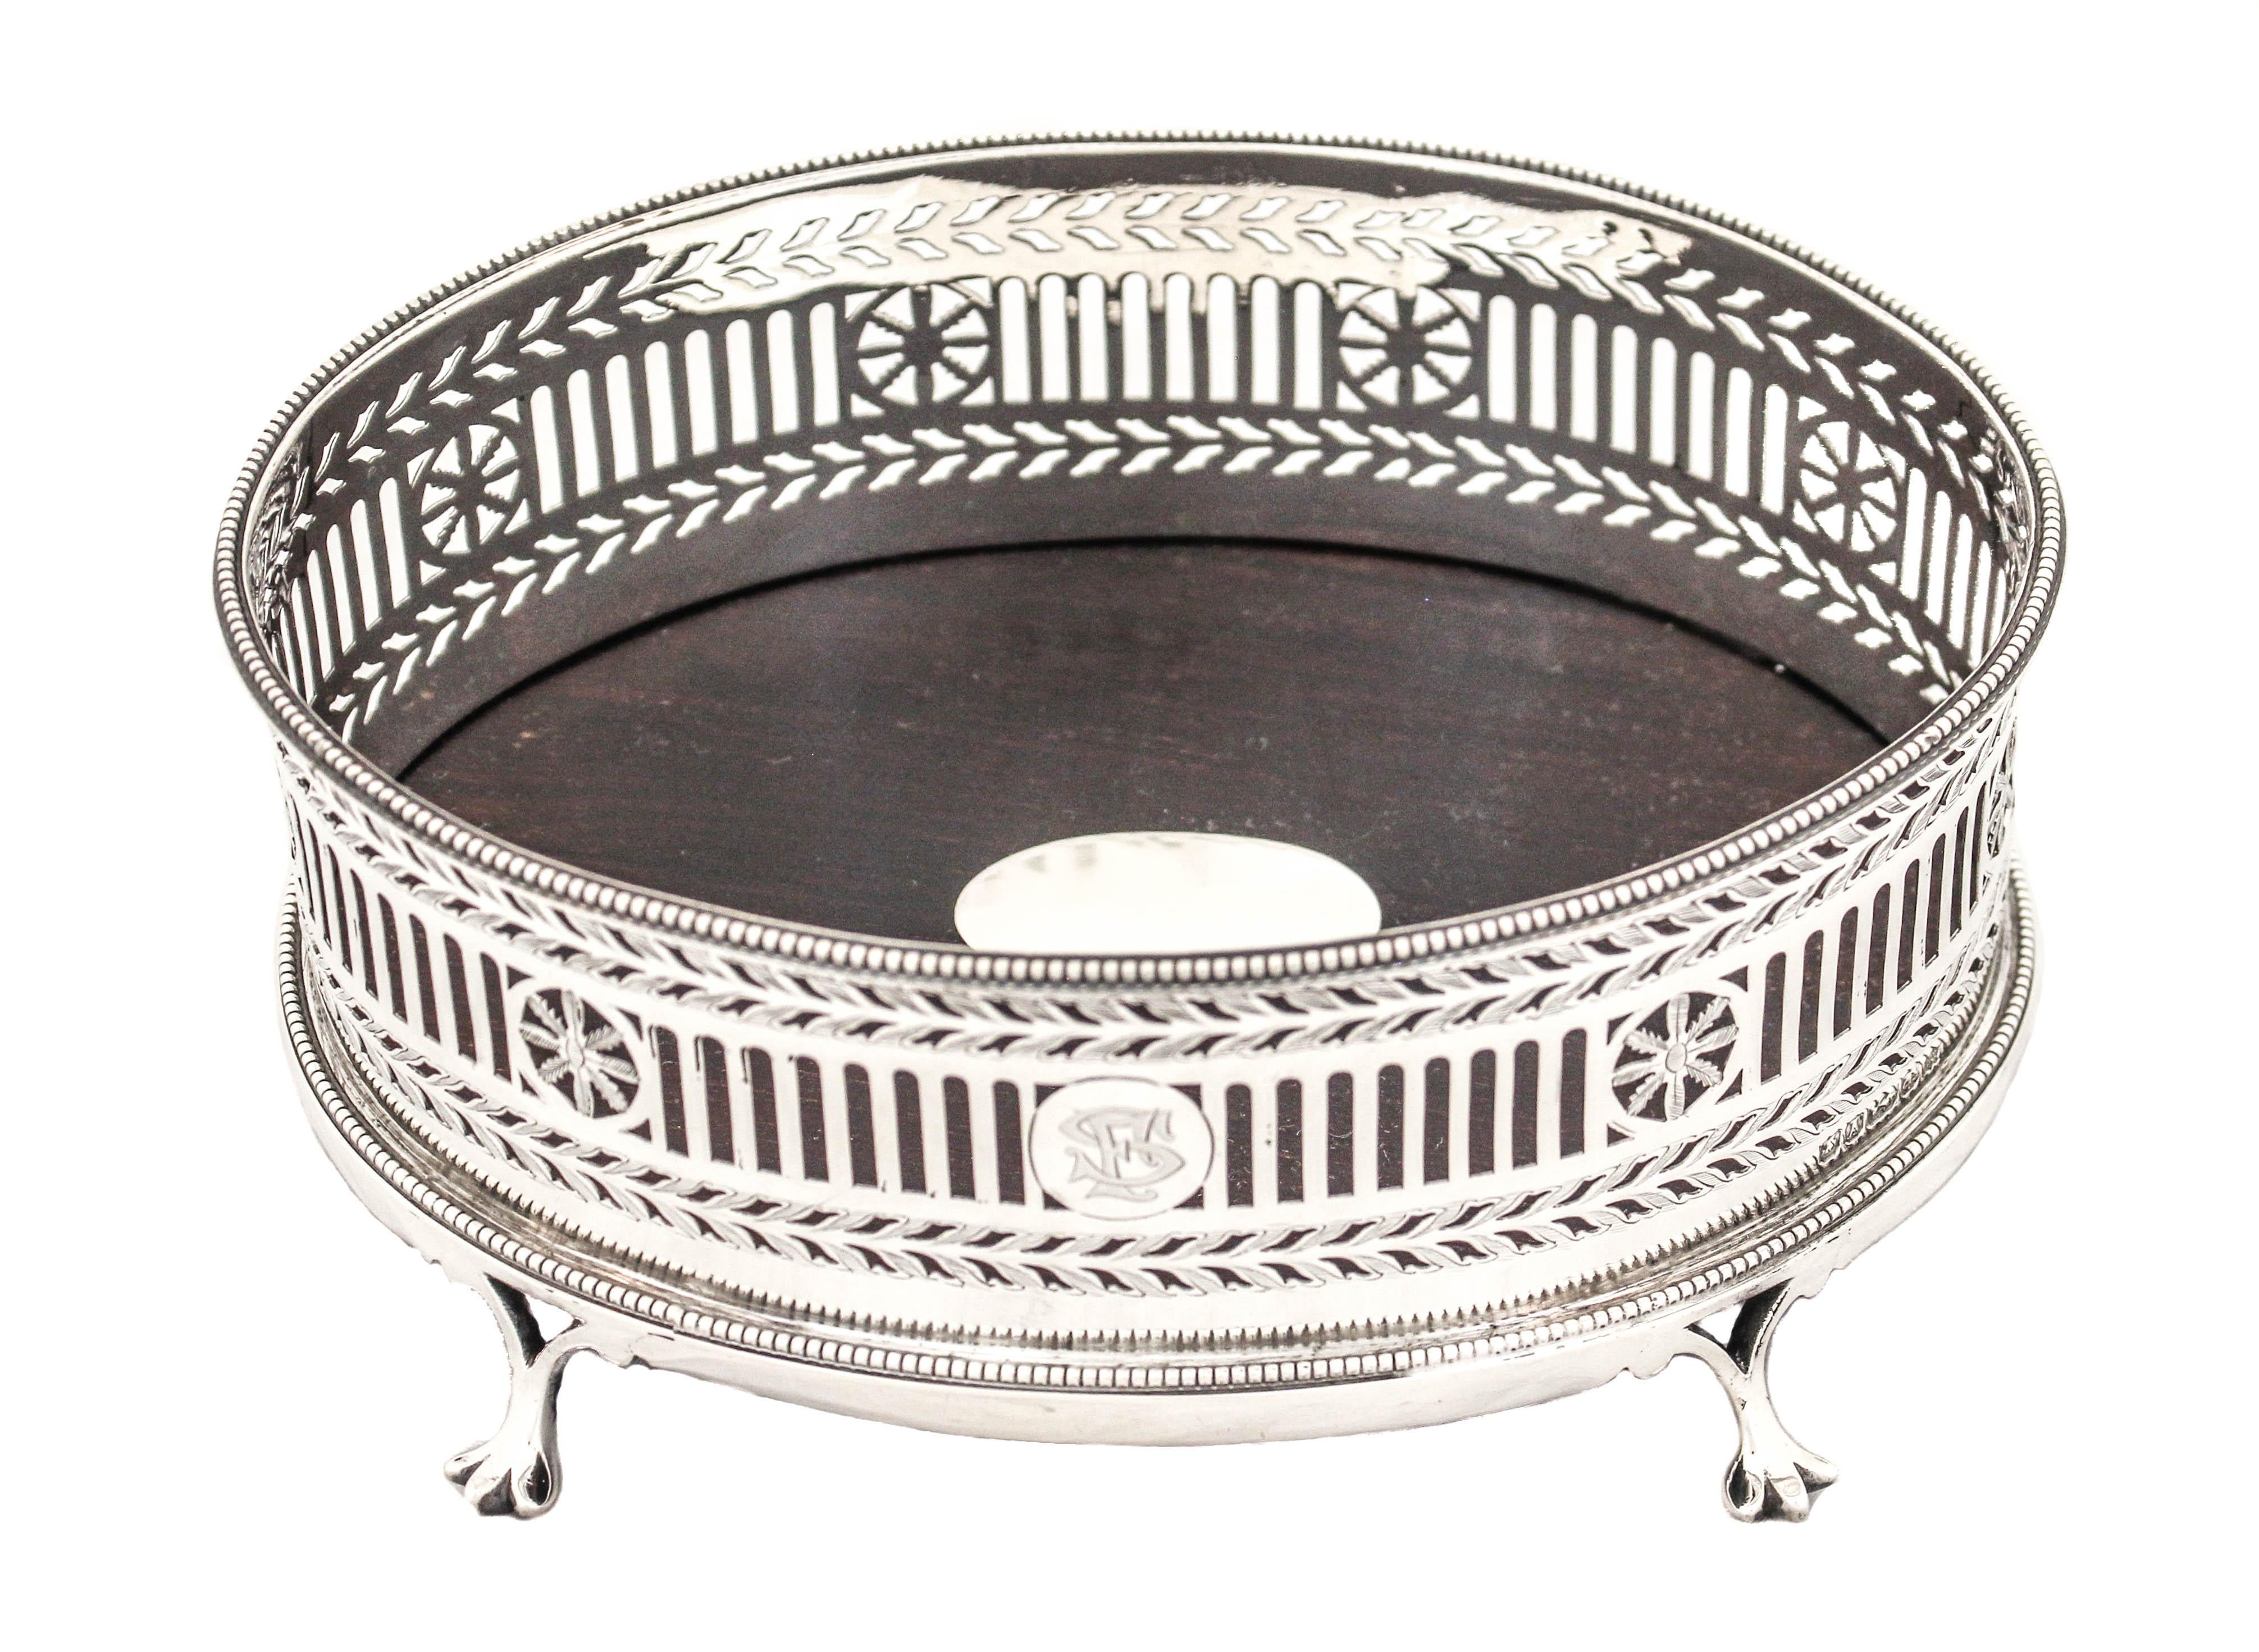 We are delighted to offer you this exceptional sterling silver (tea) tray, made by Harry Atkin (Atkin Brothers) of Sheffield England, hallmarked 1903.  This antique tray was manufactured during the reign of King Edward VII, successor to Queen